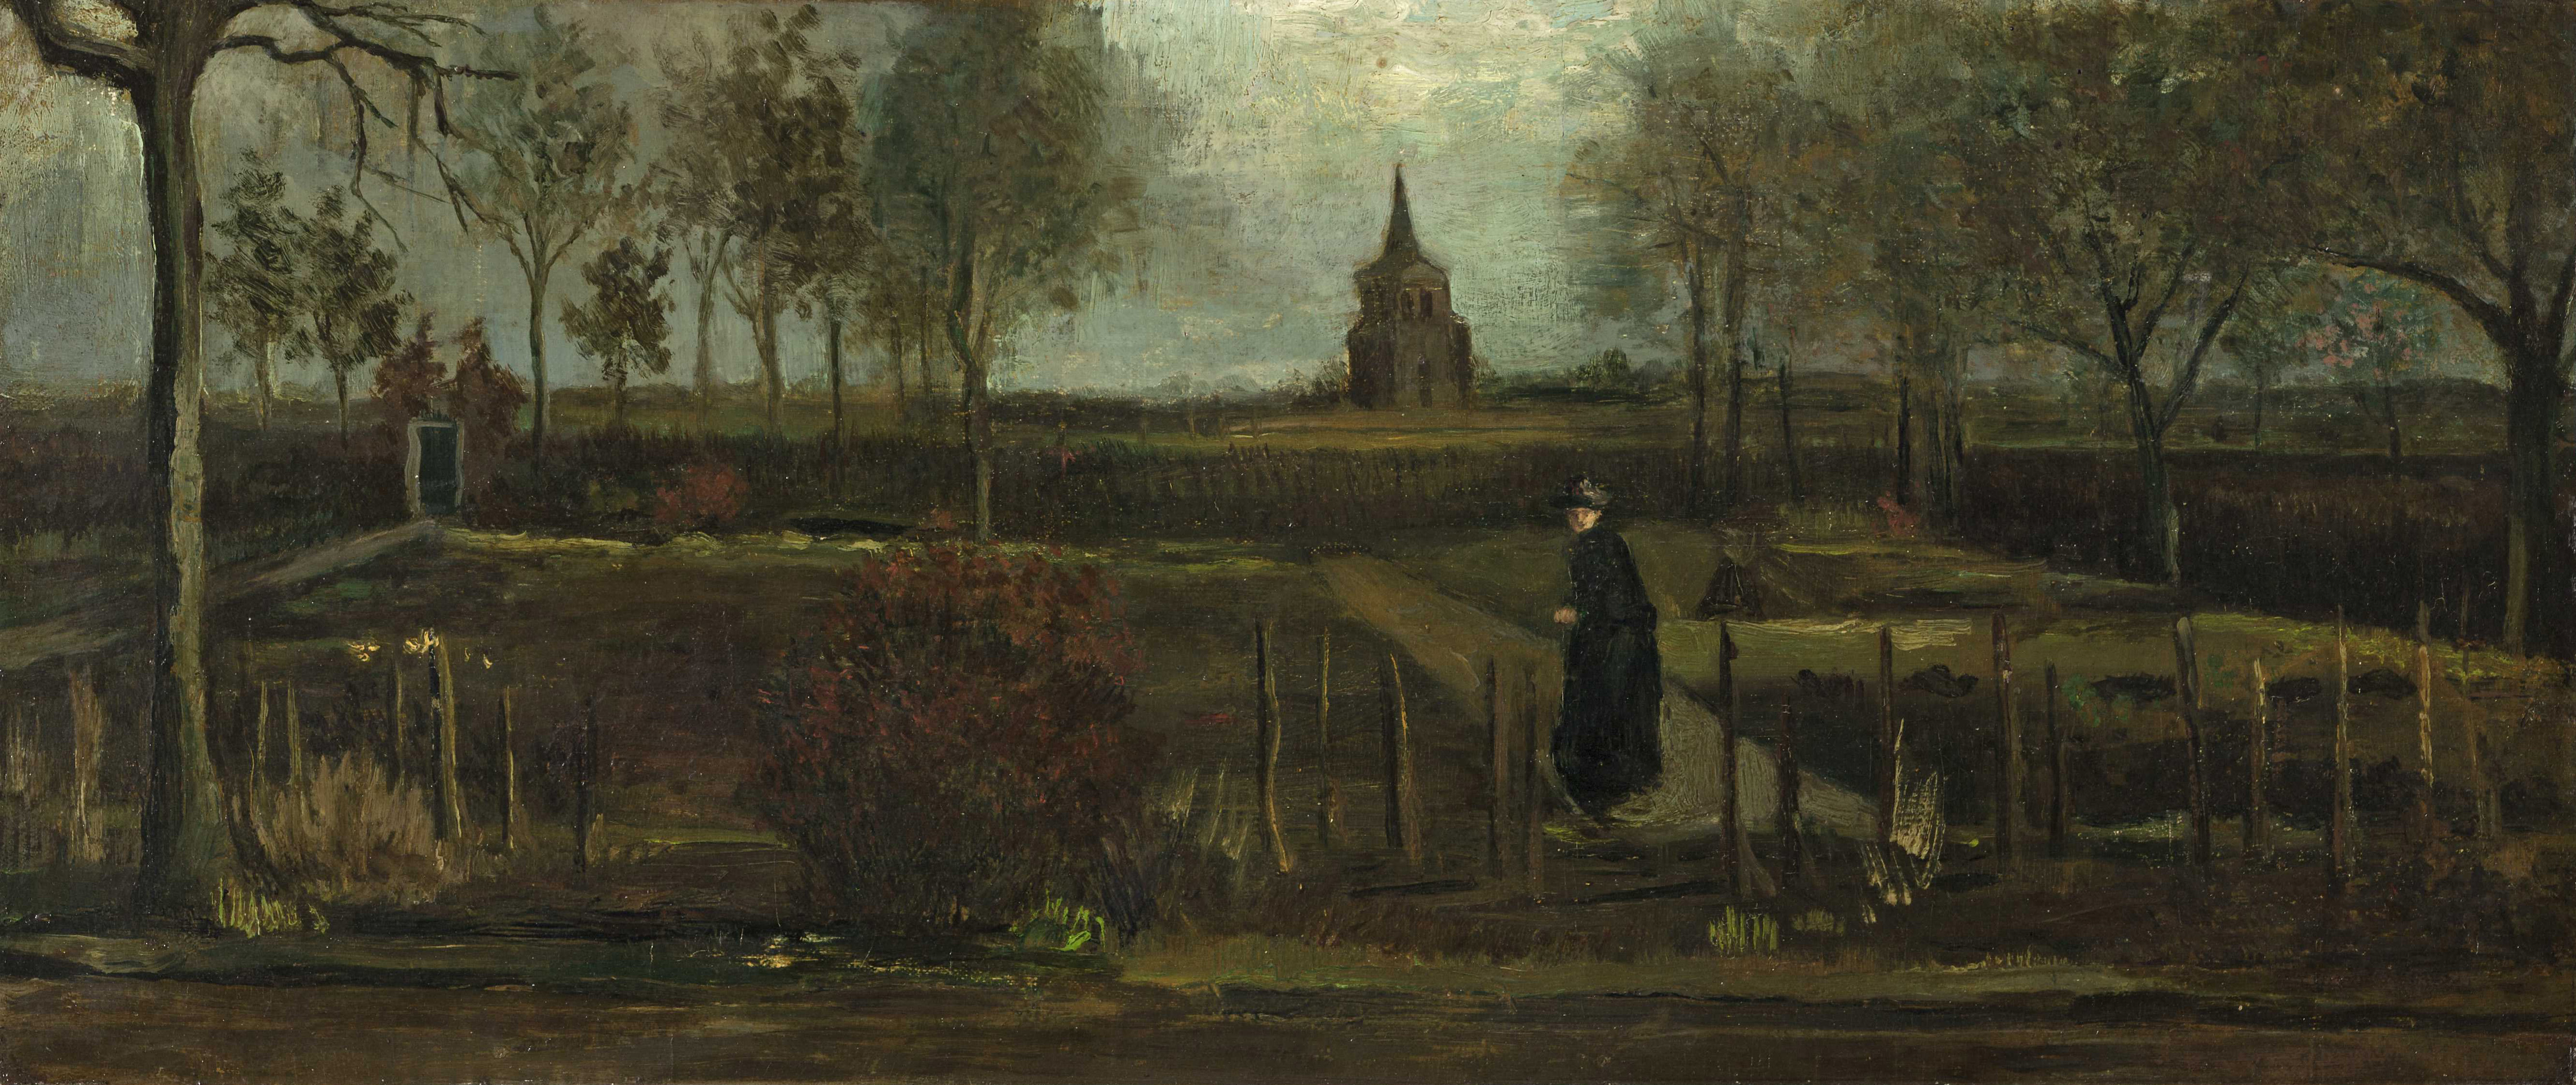 The Parsonage Garden at Nuenen in Spring (1884) was taken in the early hours of Monday Βαν Κονγκ